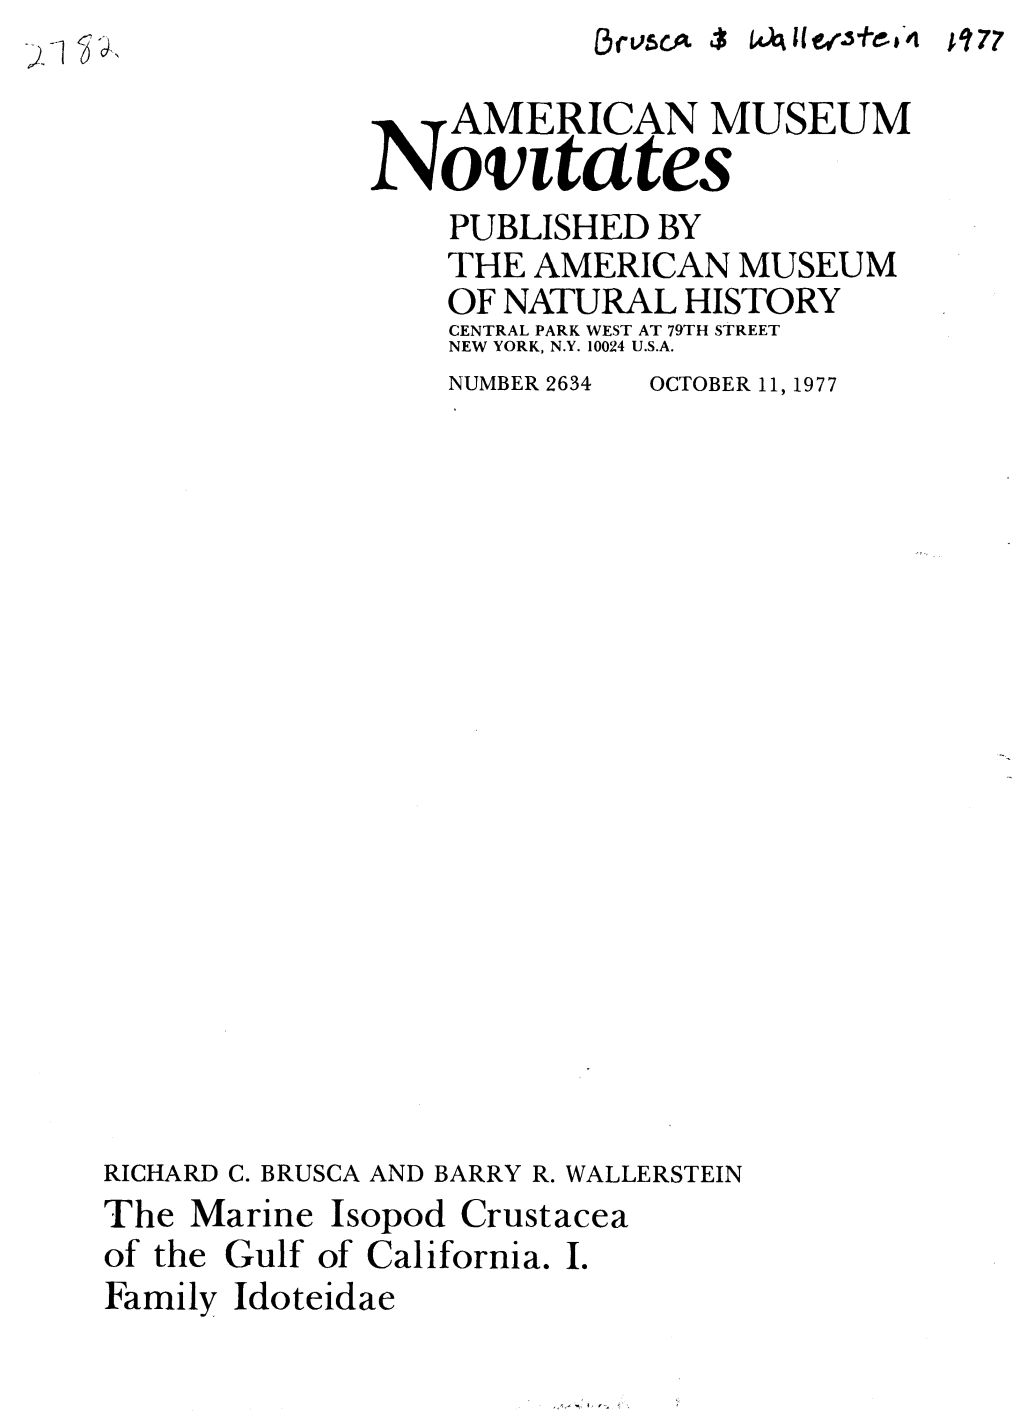 Novitatesxt AMERICAN MUSEU M PUBLISHED by the AMERICAN MUSEUM of NATURAL HISTORY CENTRAL PARK WEST at 79TH STREET NEW YORK, N.Y